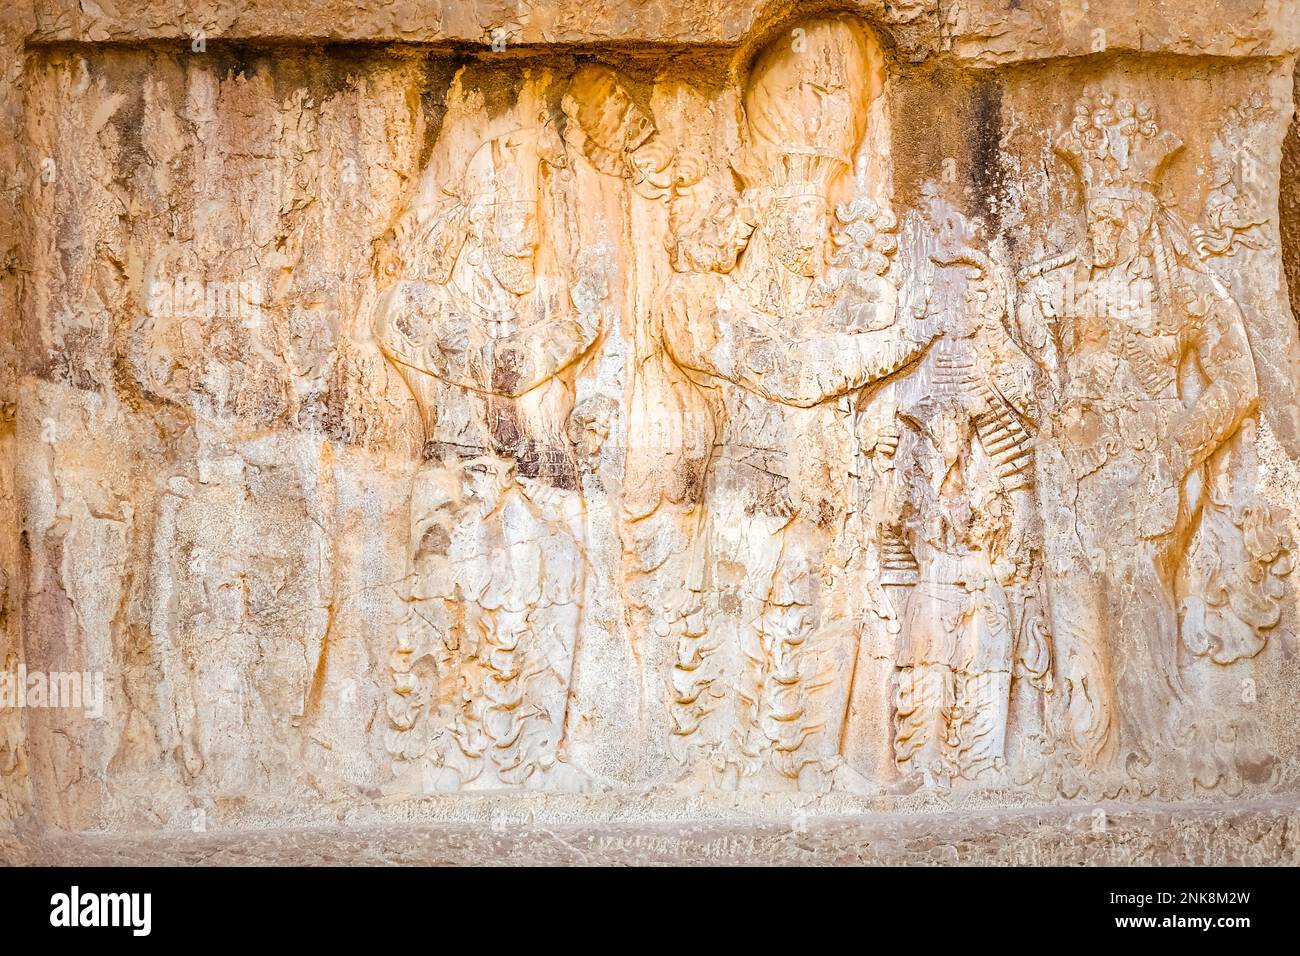 Nasqsh-e Rostam, Iran - 2022: Victory of Bahram II monument.Tombs of Artaxerxes I and Darius the Great, kings of the Achaemenid empire, located in the Stock Photo